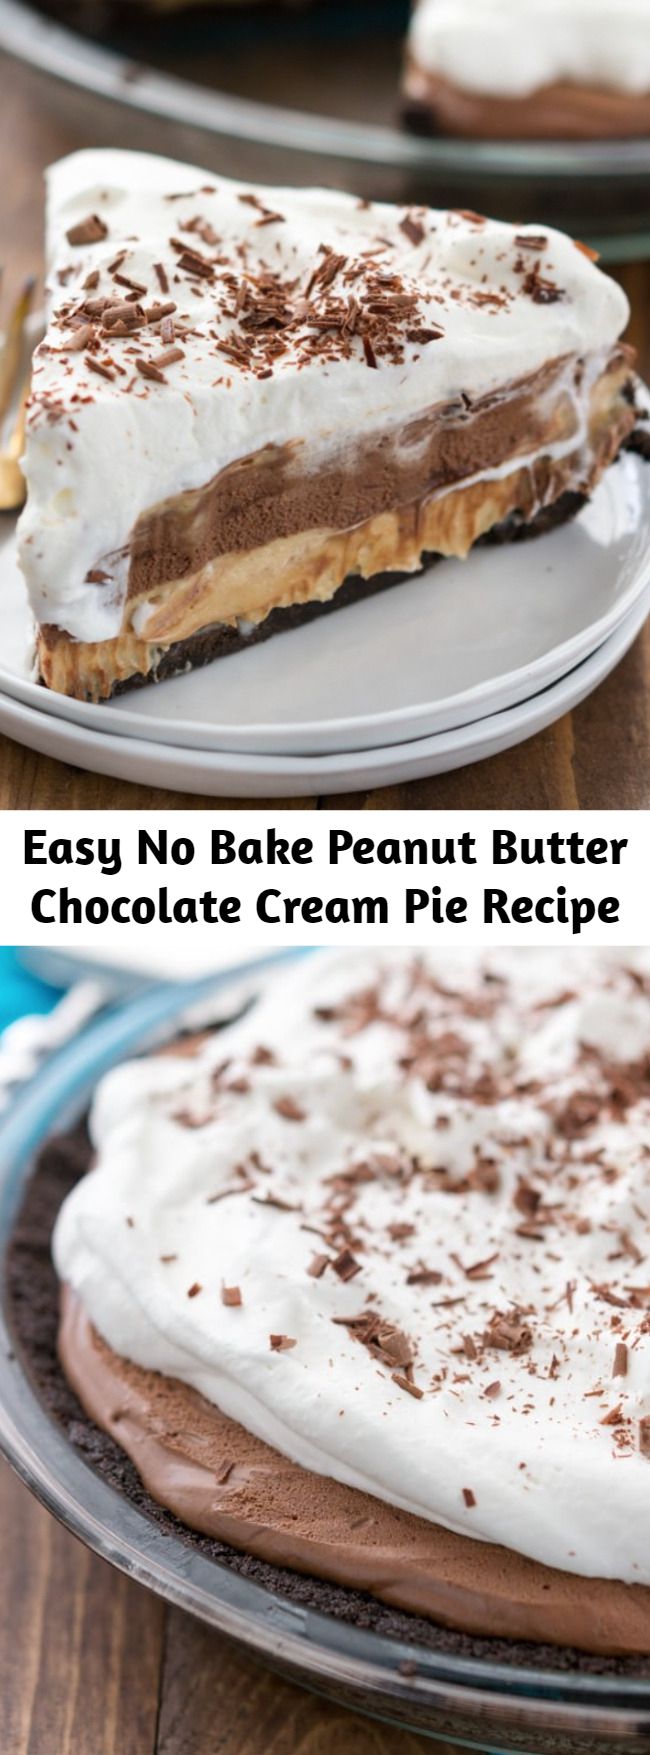 Easy No Bake Peanut Butter Chocolate Cream Pie Recipe - Layers of Oreo crust, peanut butter, and chocolate cream pair perfectly for the best pie I've ever eaten! The best part is it's totally no bake and egg-free! I just can’t even express how good it was. Words like decadent, amazing, creamy, and delicious just don’t seem to suffice. Because it was better than all of those words.